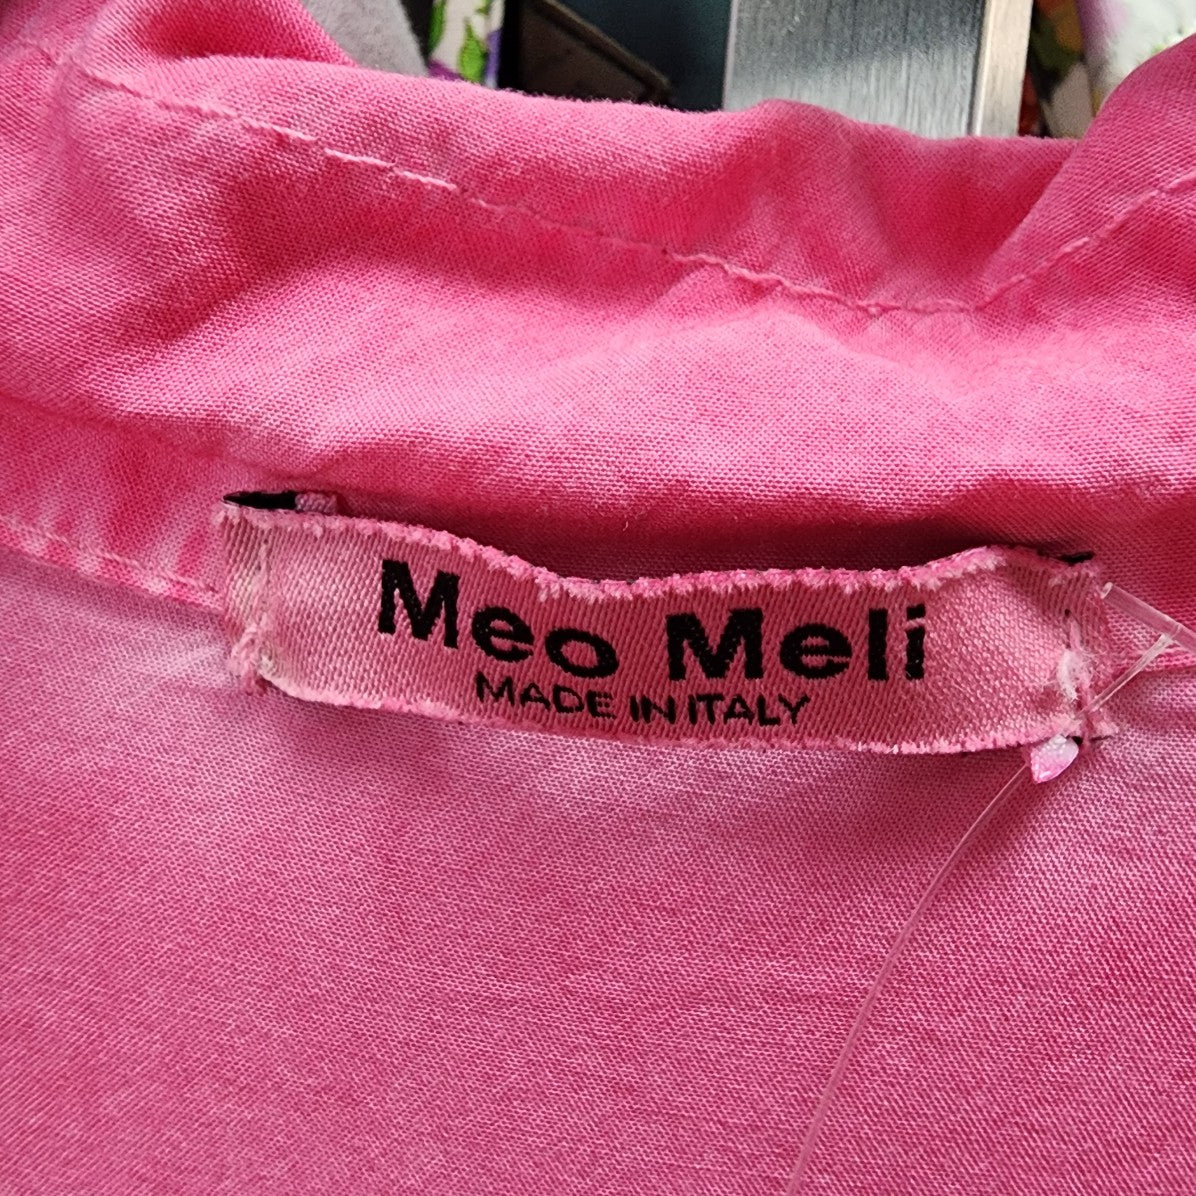 Meo Meli Made In Italy Pink Cotton Button Up Blouse Size L